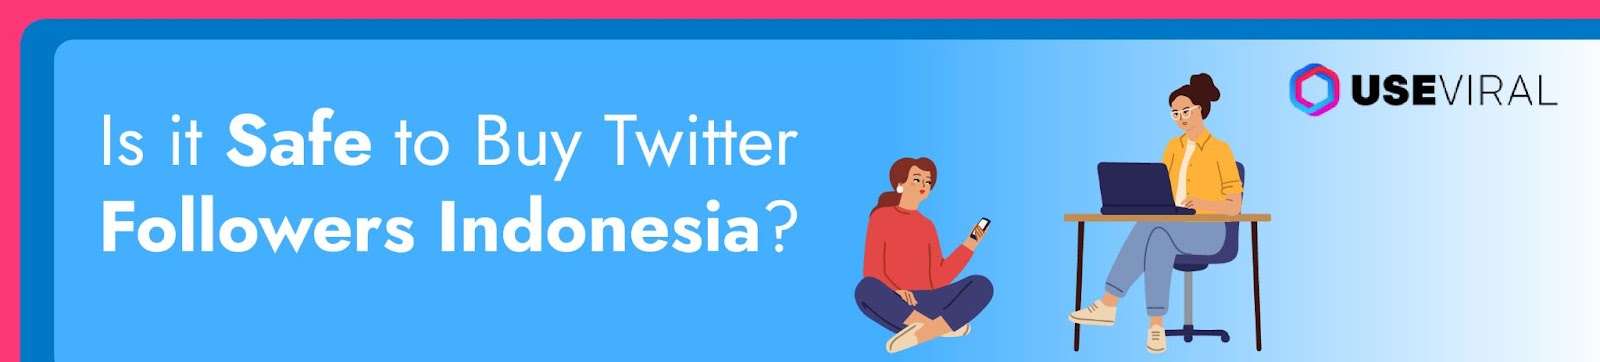 Is it Safe to Buy Twitter Followers Indonesia? 